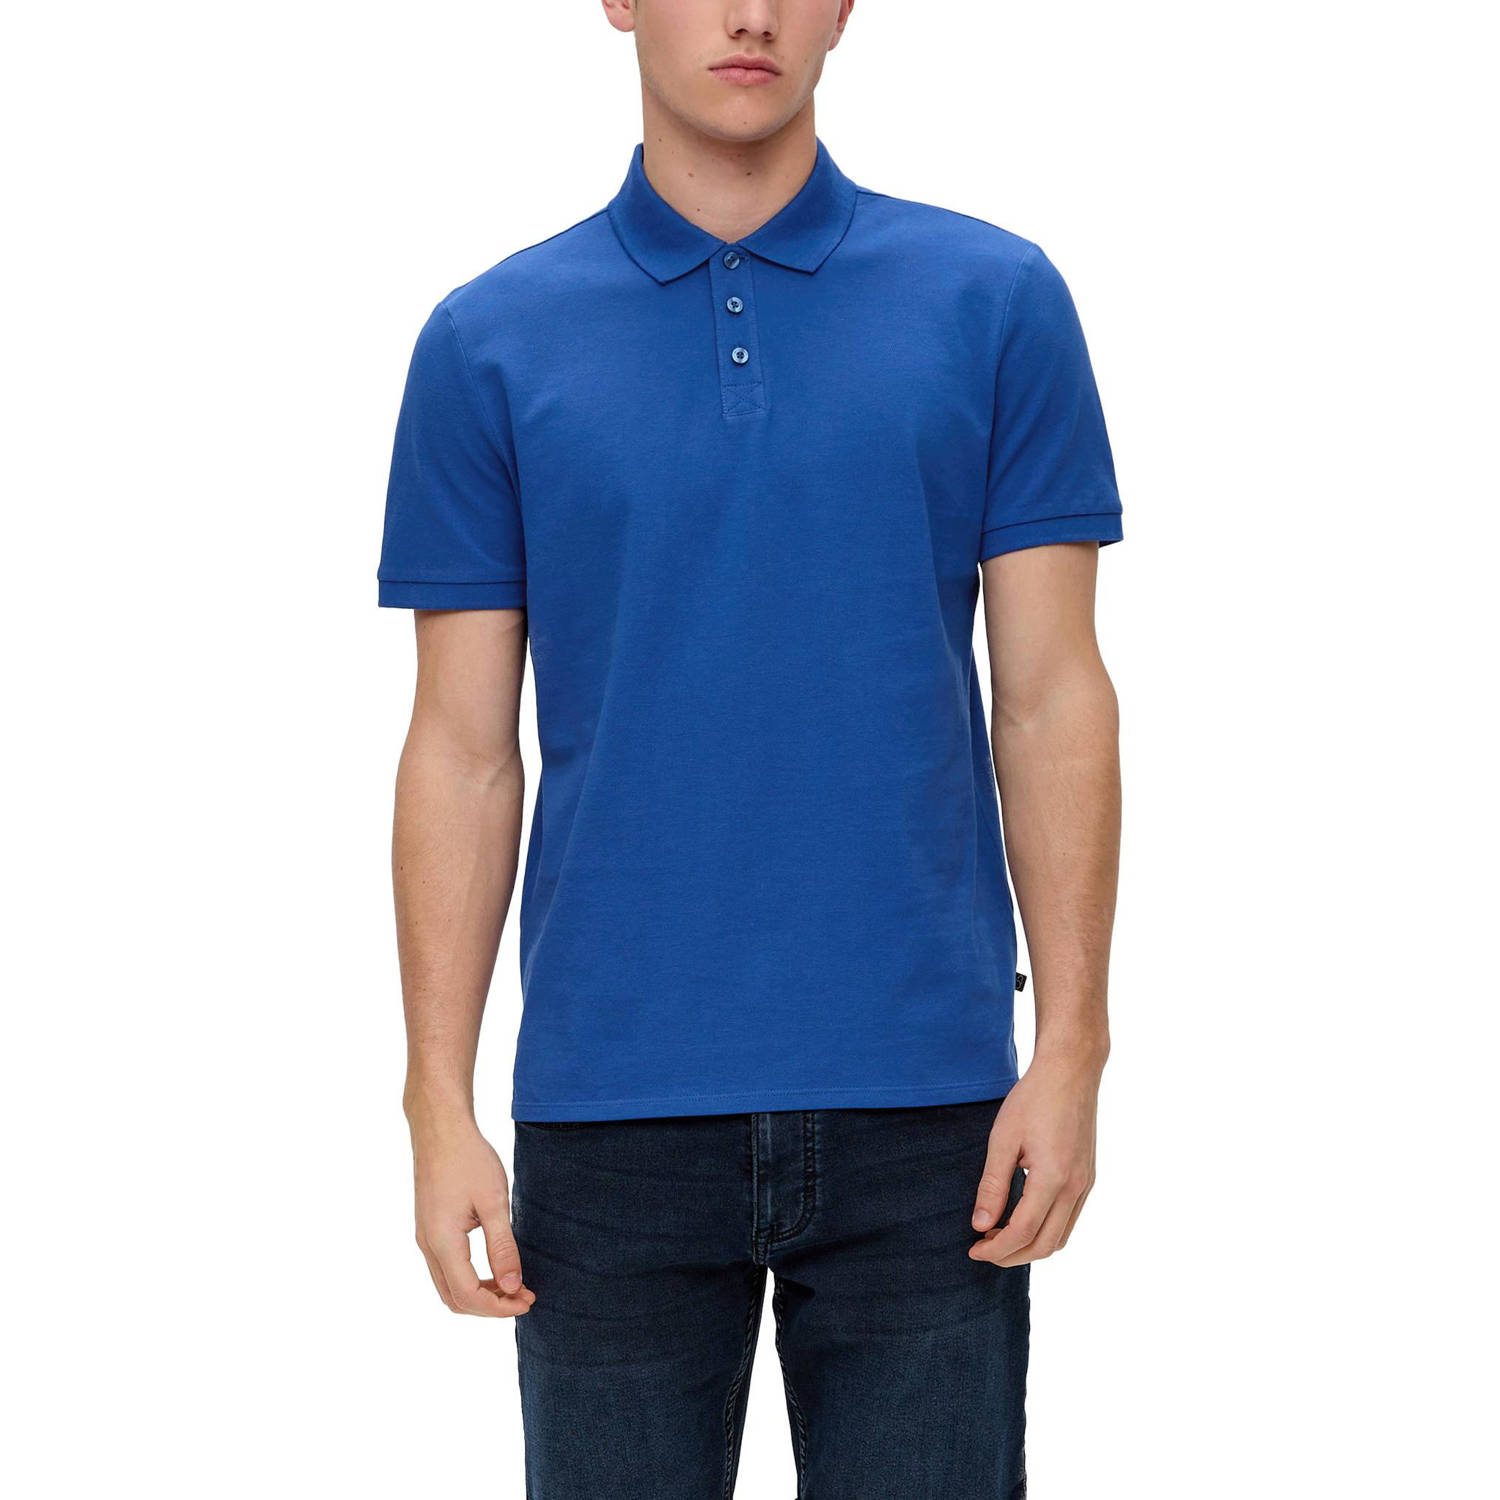 Q S by s.Oliver regular fit polo blauw